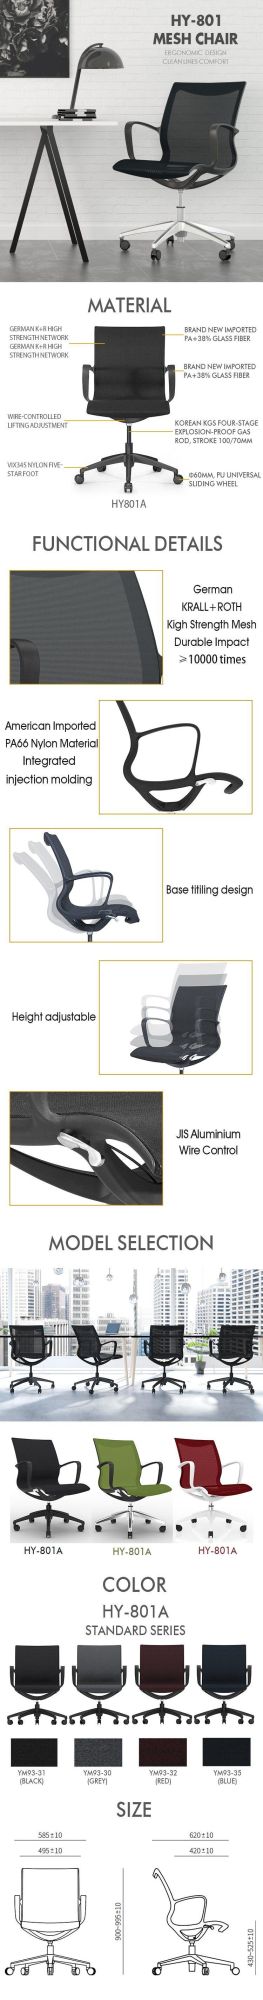 Guangdong Chair Factory Adjustable Armrest Height Comfortable Commercial Office Fashion Swivel Lift Chair